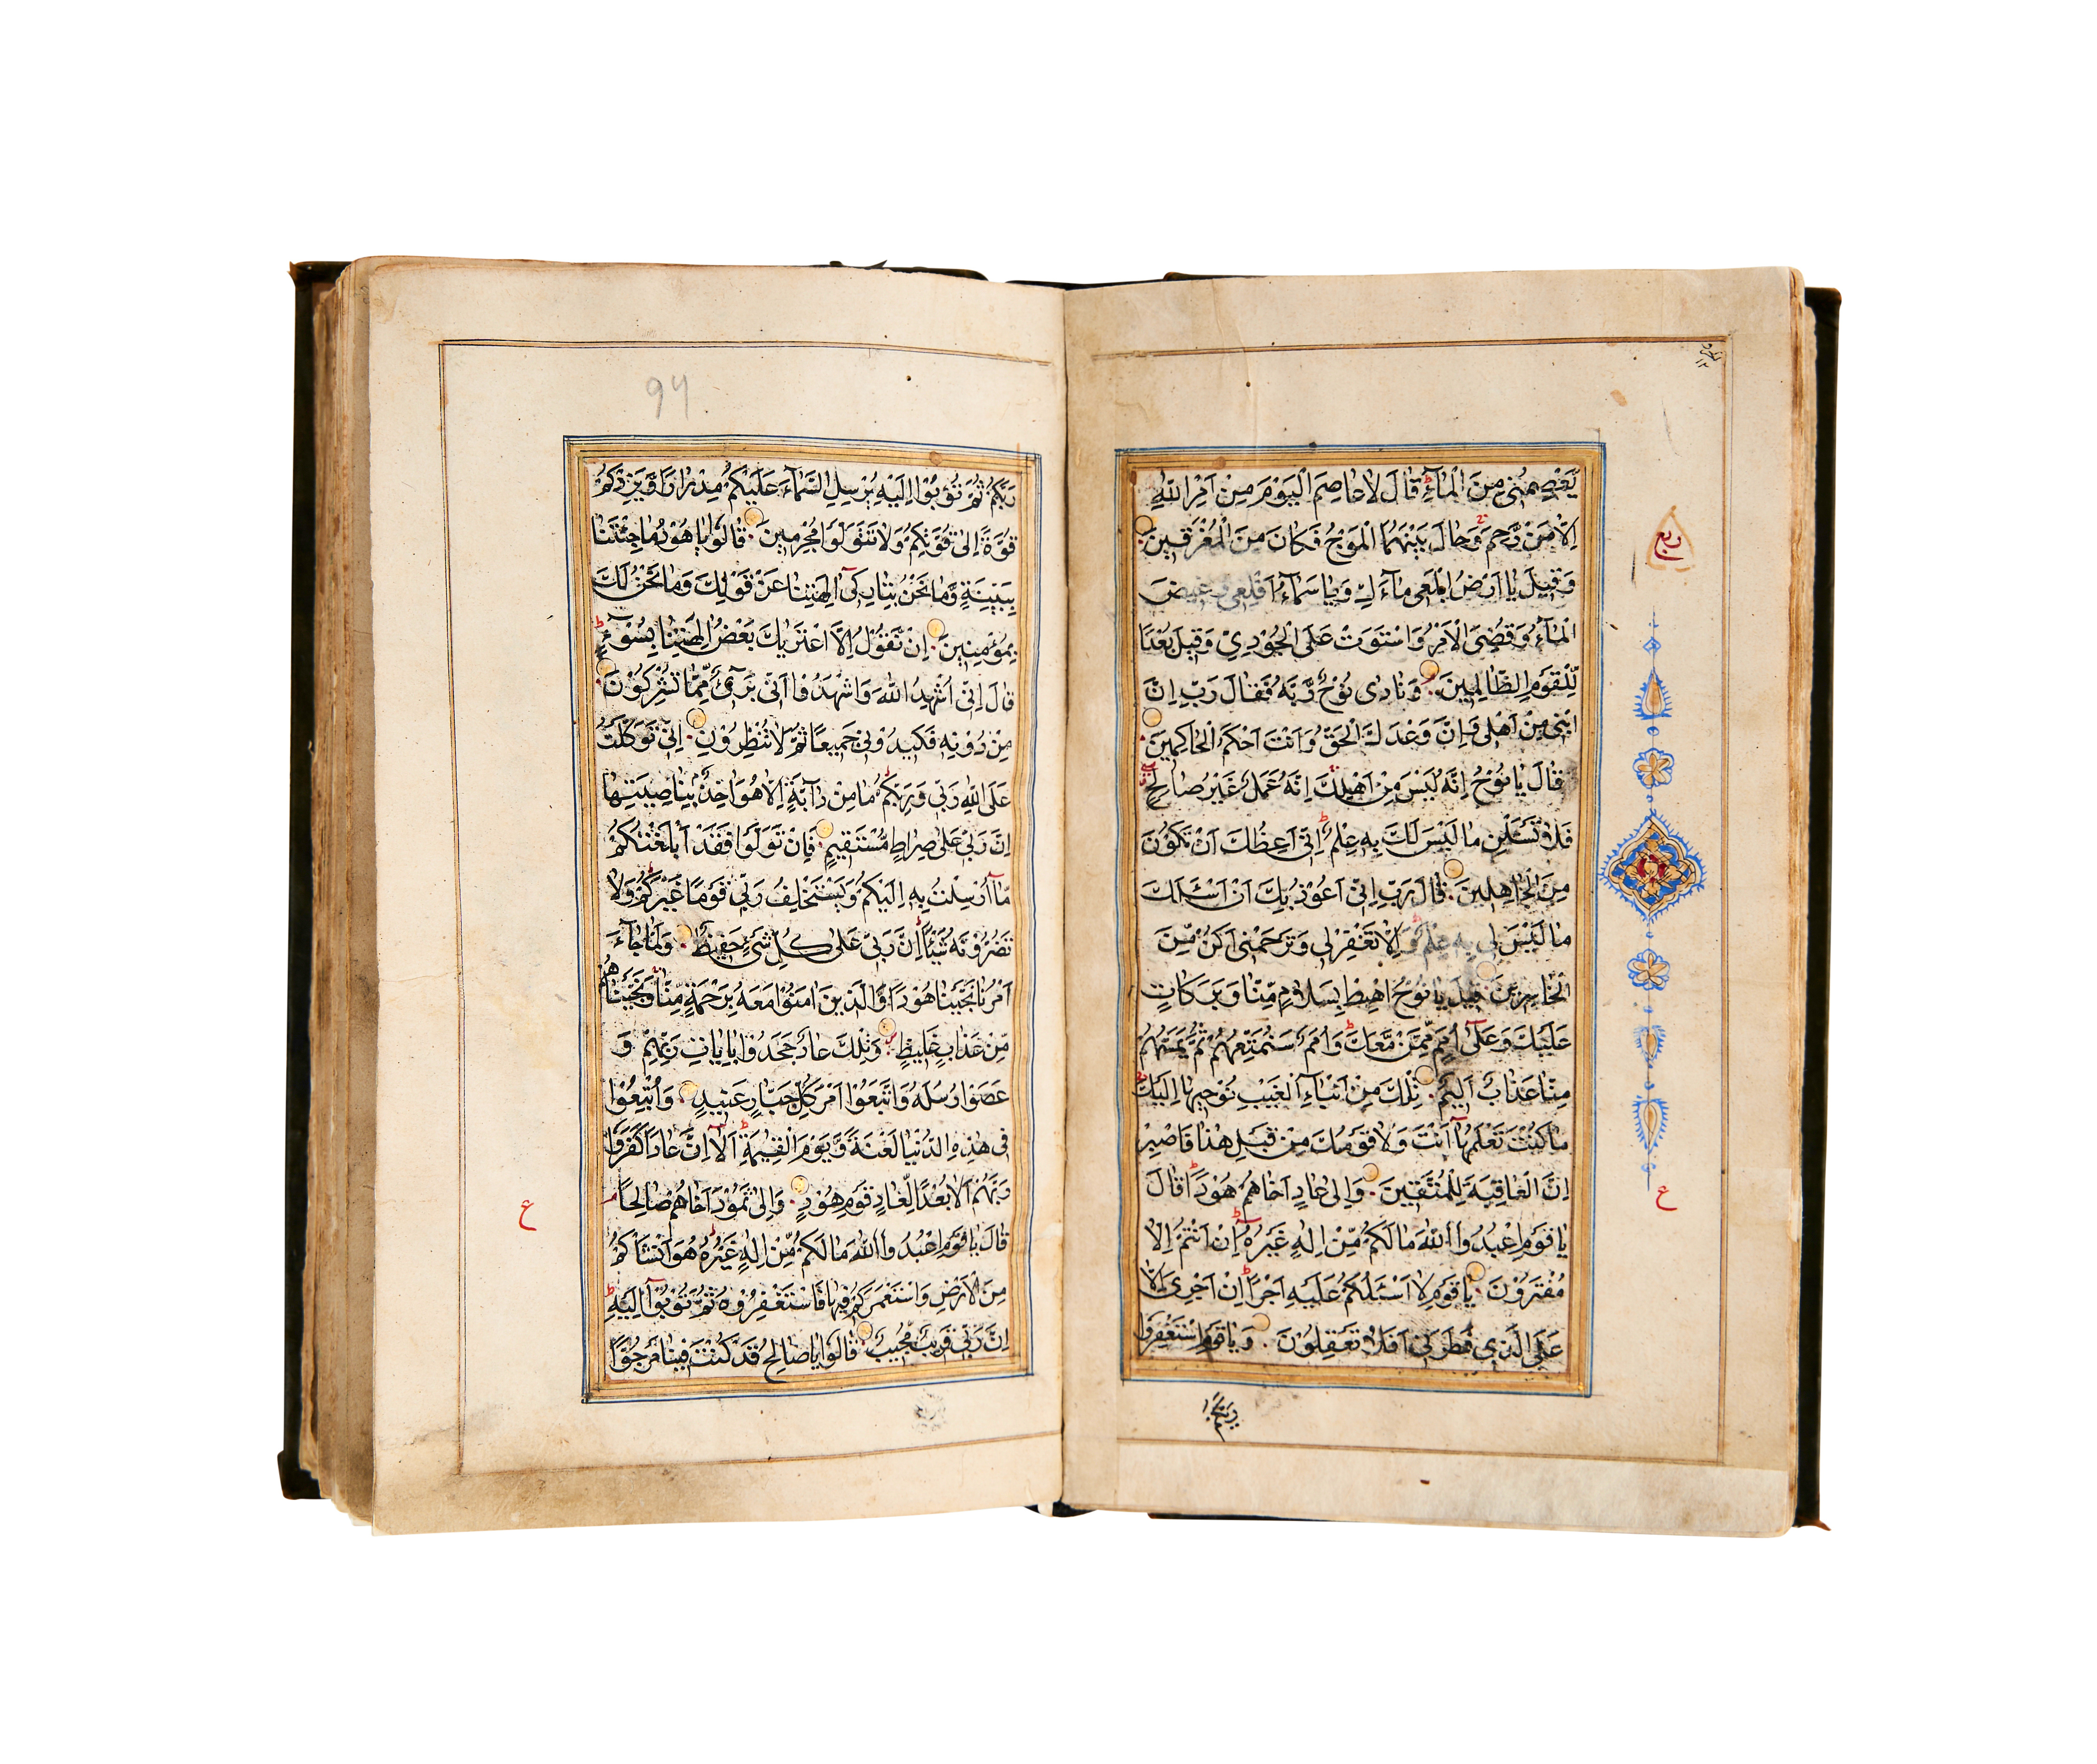 AN ILLUMINATED QUR’AN, NORTH INDIA, KASHMIR, 19TH CENTURY - Image 4 of 10